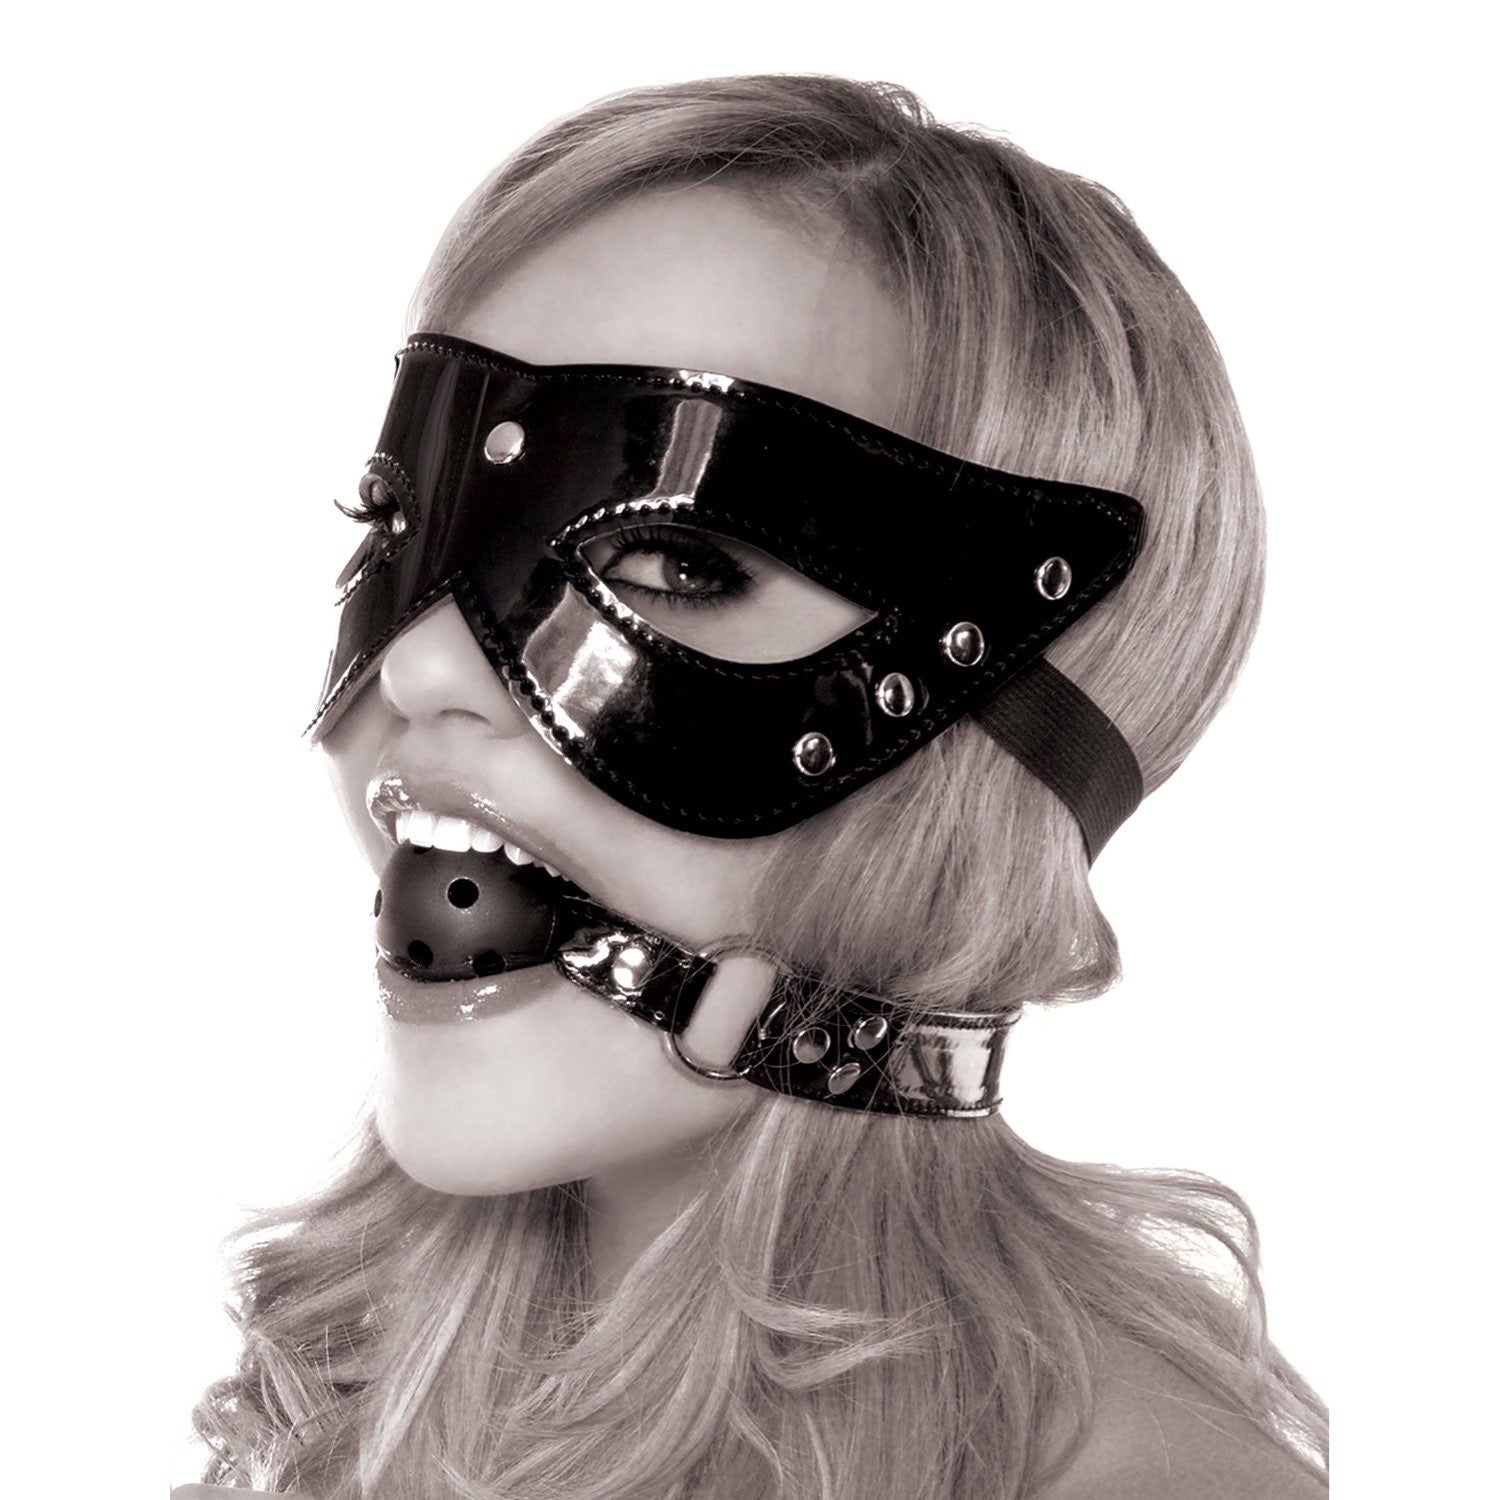 Fetish Fantasy Series Limited Edition Masquerade Mask &amp; Ball Gag - Black Mask &amp; Mout Restraint - 2 Piece Set by Pipedream